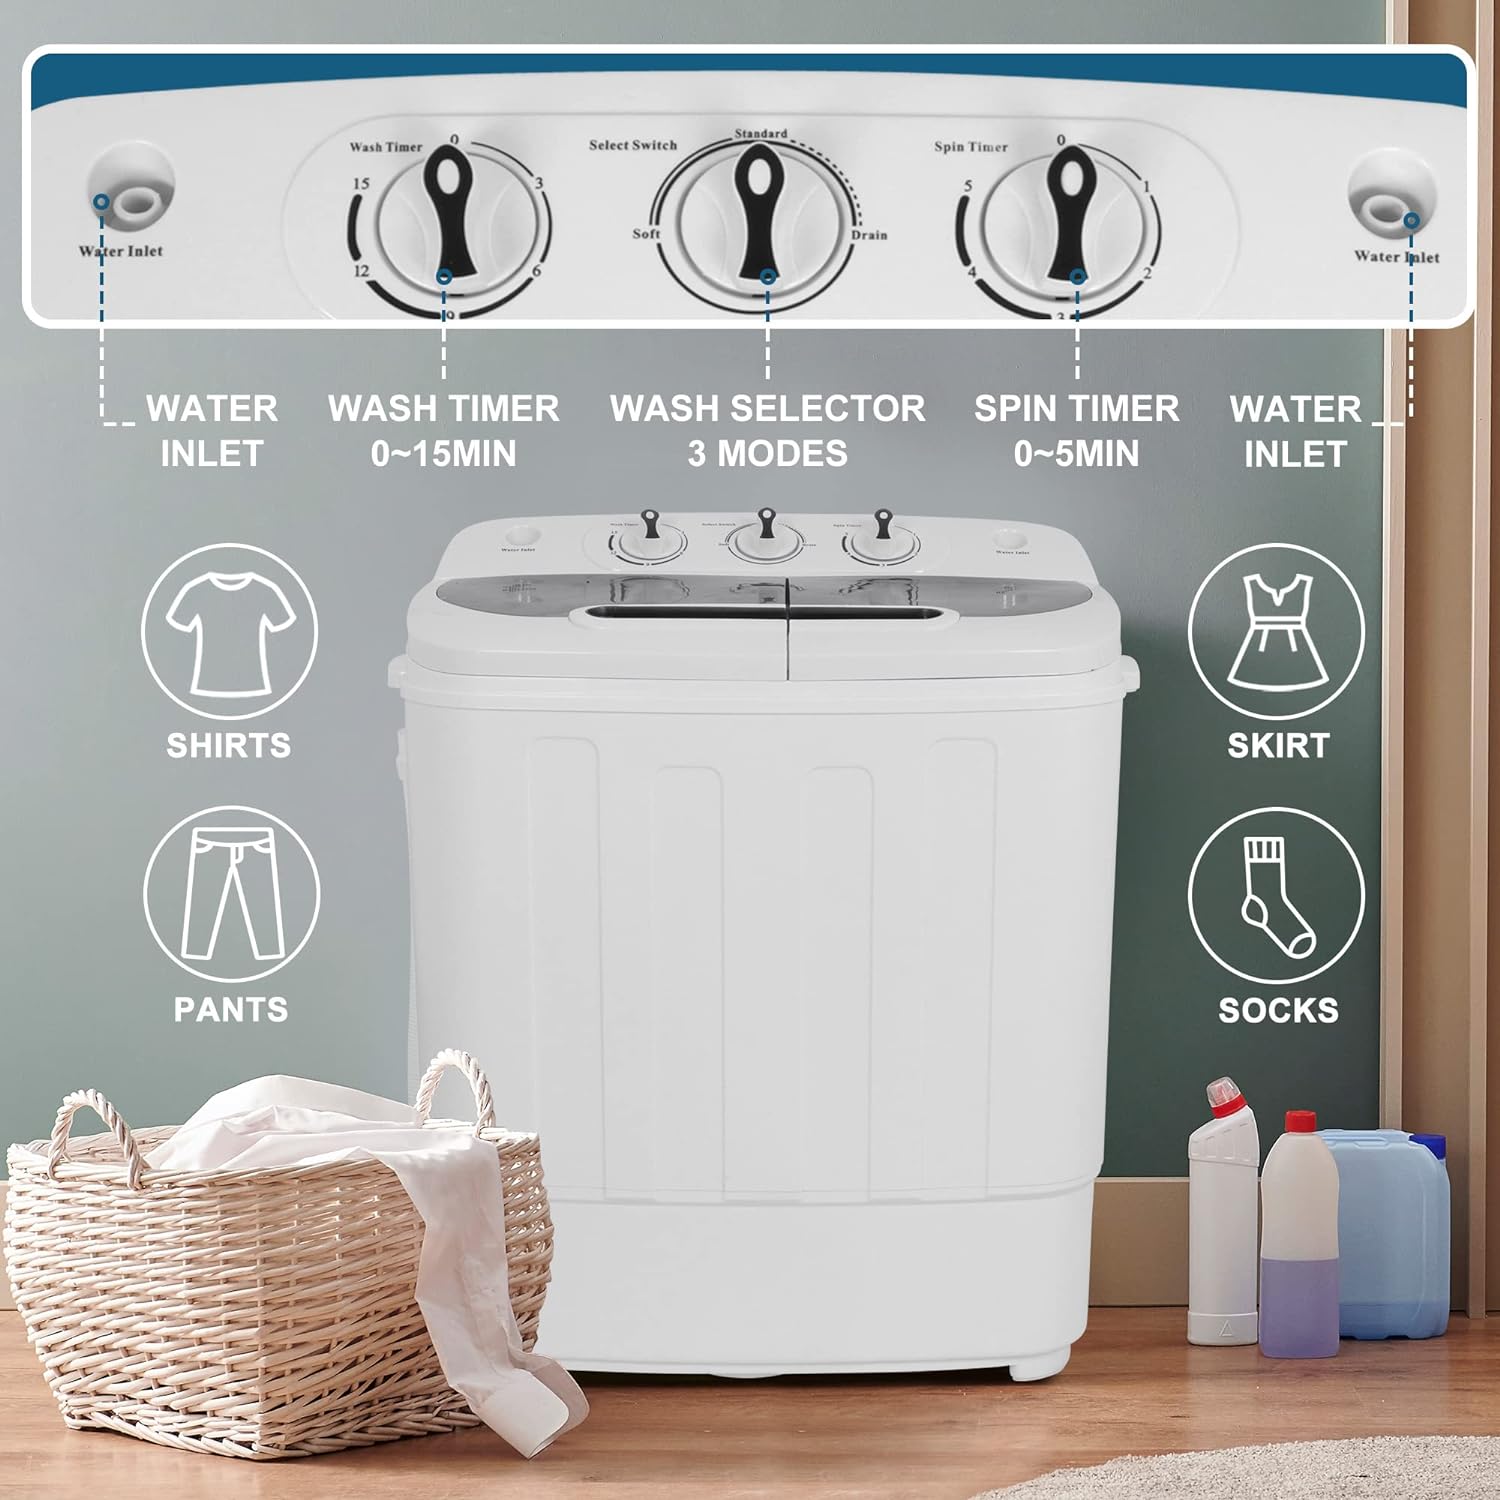 SUPER DEAL Compact Mini Twin Tub Washing Machine 13lbs Capacity Portable Washer Wash and Spin Cycle Combo, Built-in Gravity Drain for Camping, Apartments, Dorms, College, RV’s and Small Spaces